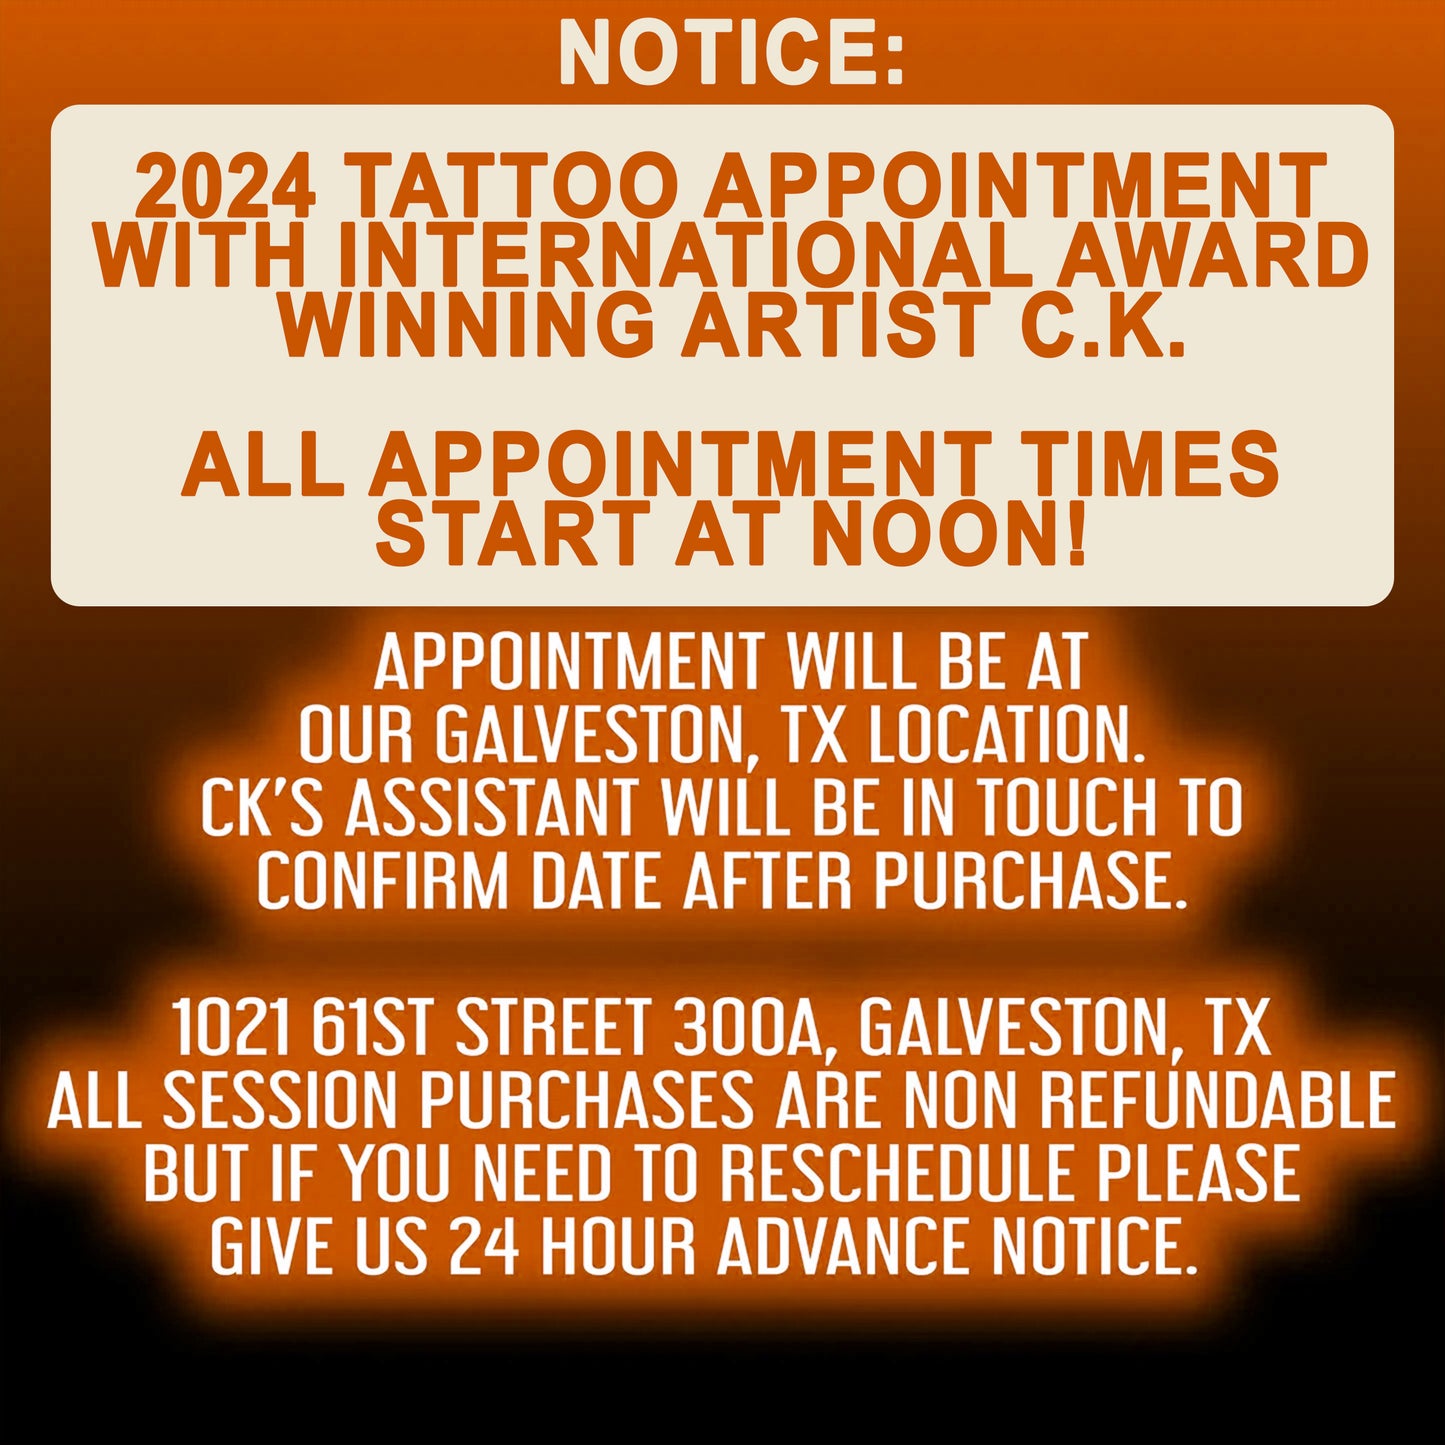 6 hour Tattoo Session with CK MARCH 26th, 2024